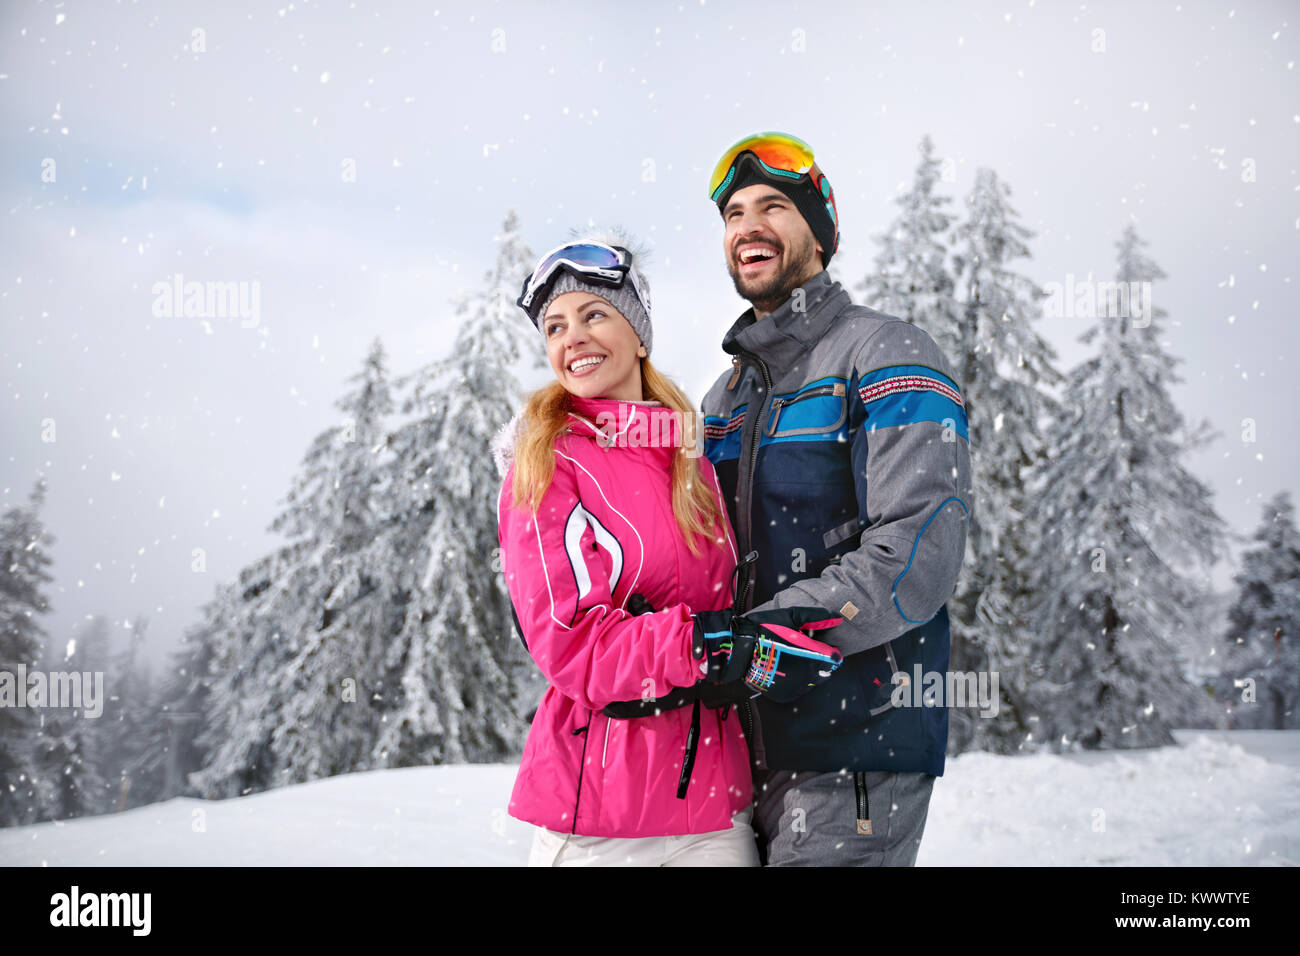 Smiling couple happy together on mountain for winter vacation Stock Photo